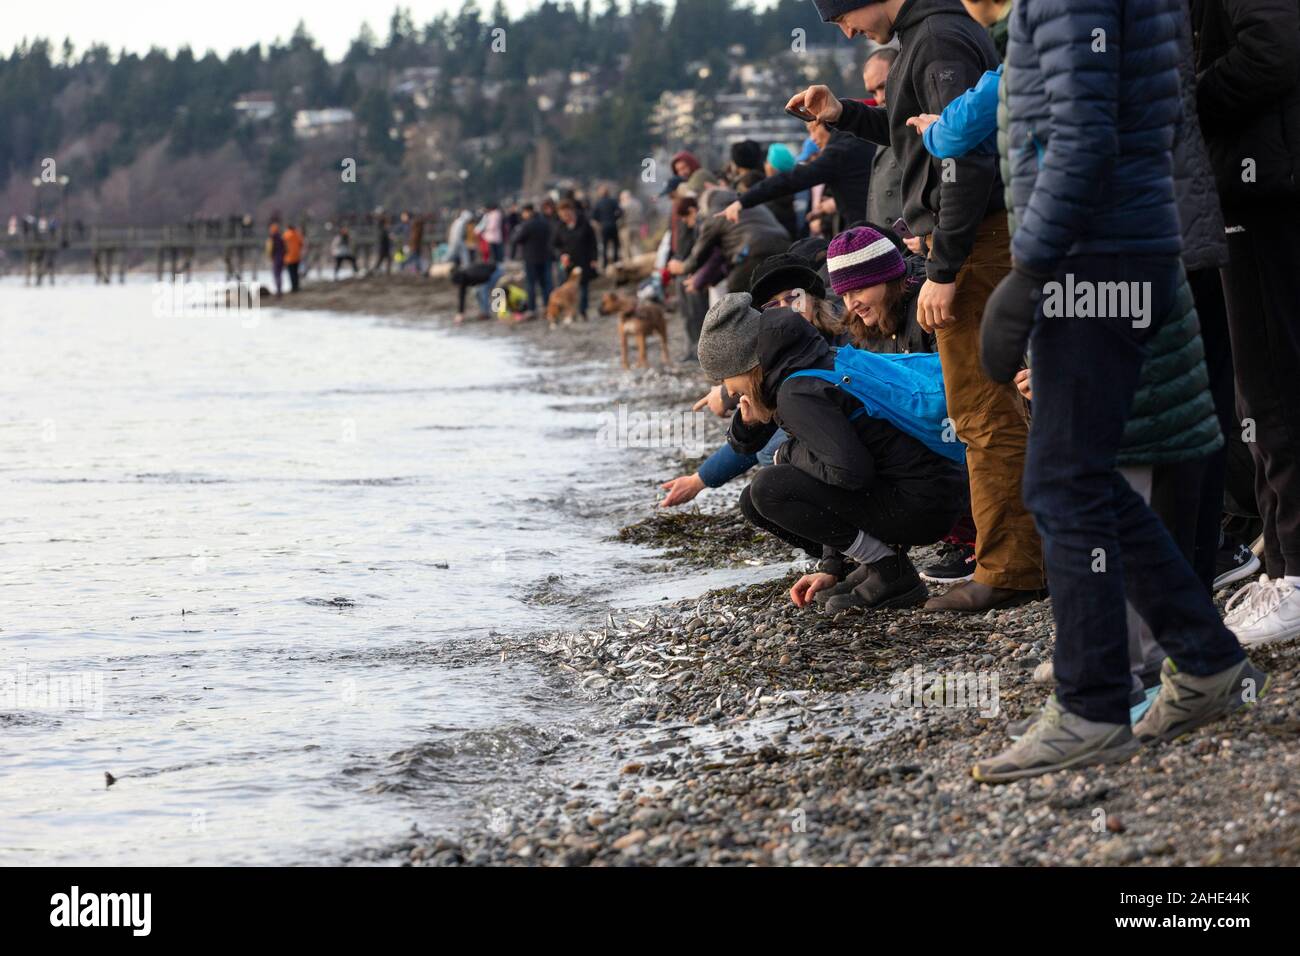 Thousands of tiny fish,  anchovies,  washed up to shore at White Rock Beach, south of Vancouver,  BC Canada on Dec. 25, 2019.   Drawing crowds of bird Stock Photo